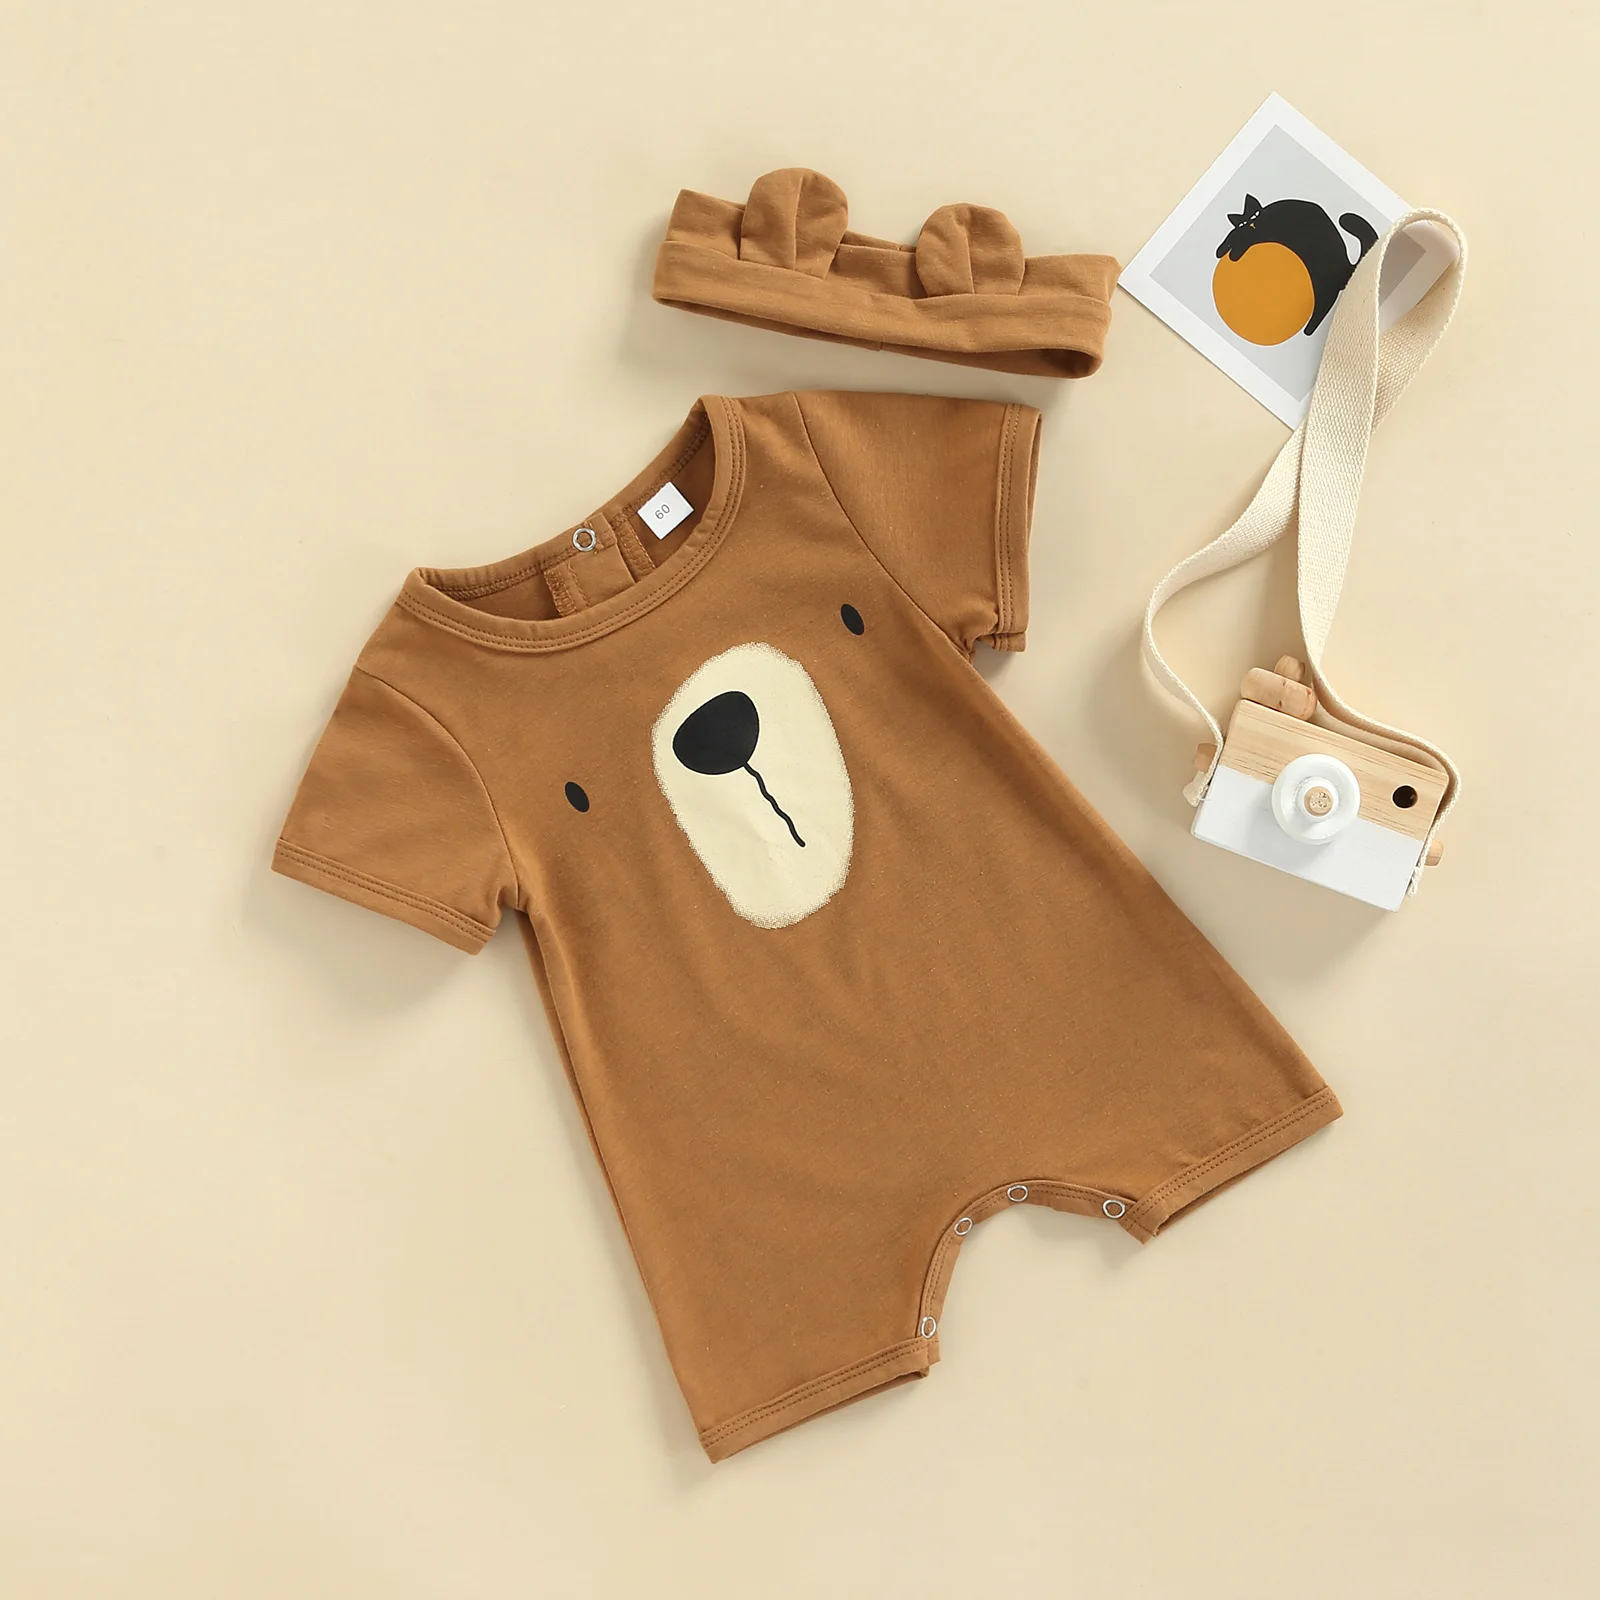 Ma&Baby 0-18M NewbornToddler Infant Baby Boy Girl Jumpsuit Cartoon Bear Romper Summer Clothes Ear Headband Outfits Costumes D01 cool baby bodysuits	